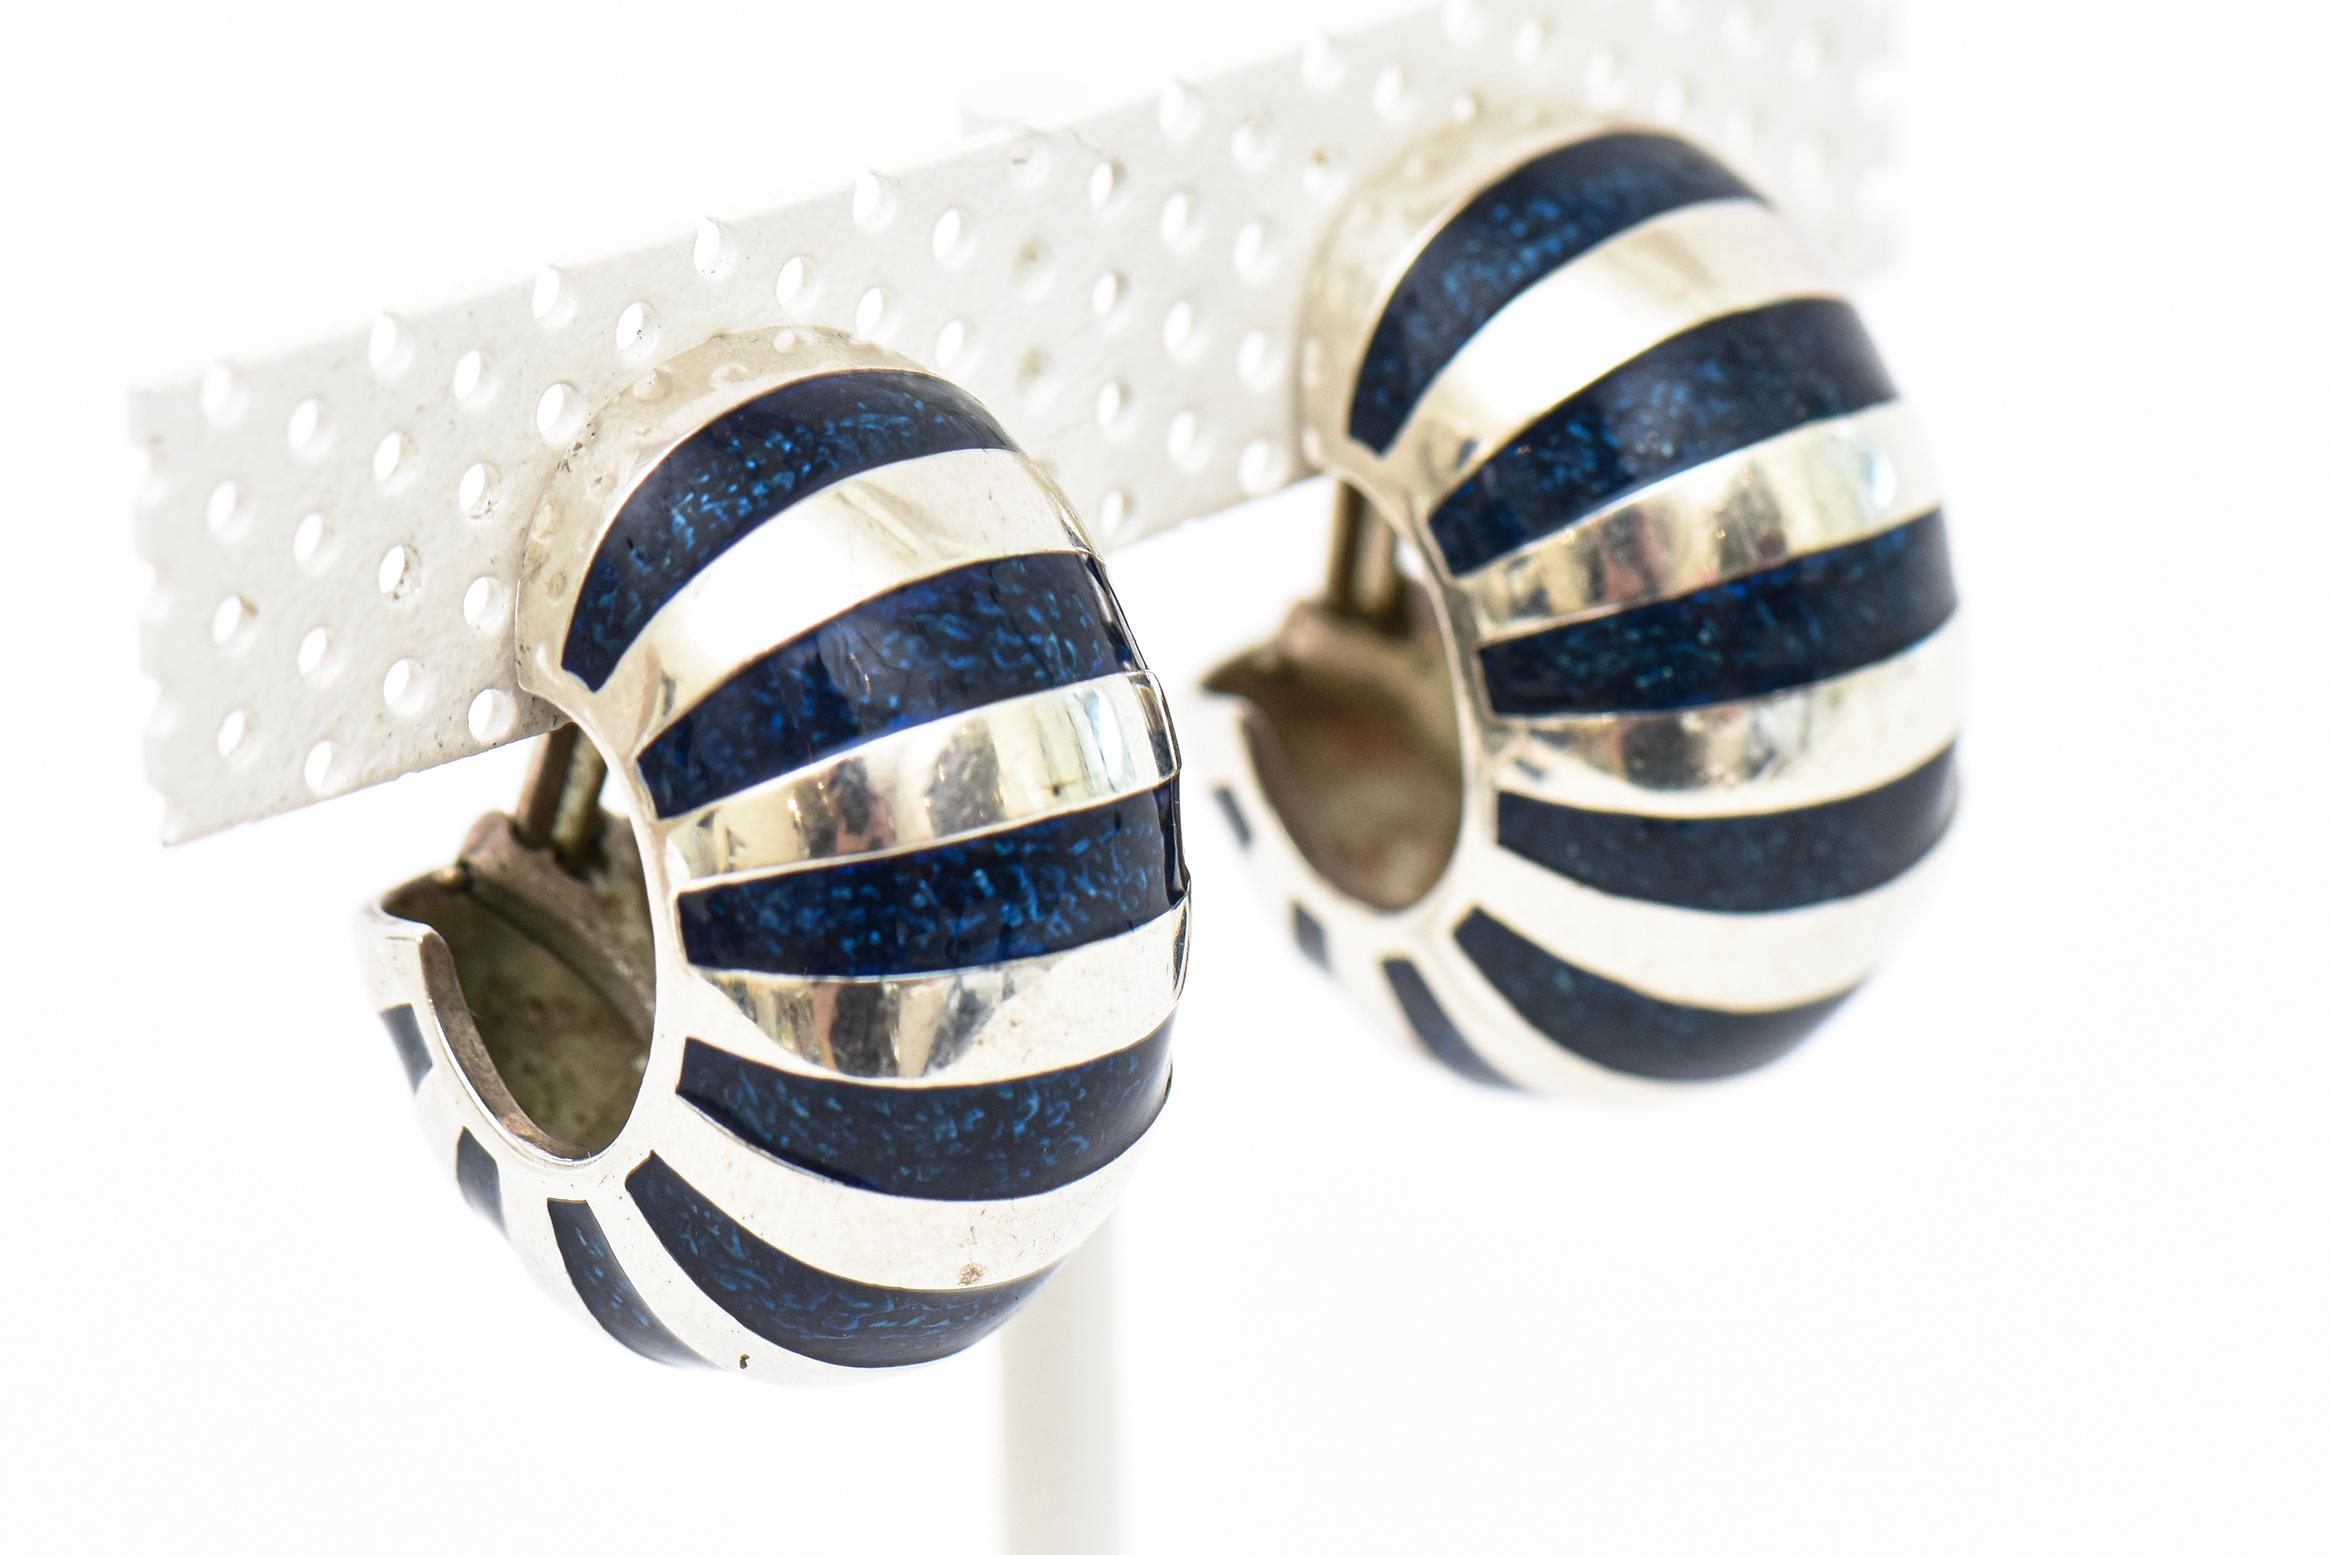 This lovely vintage hallmarked Tiffany &Co hoop lever back earrings are coined the shrimp tail. These are the large size and are a rich dark navy blue enamel with sterling silver. The navy blue is more desirable and collectable and harder to come by